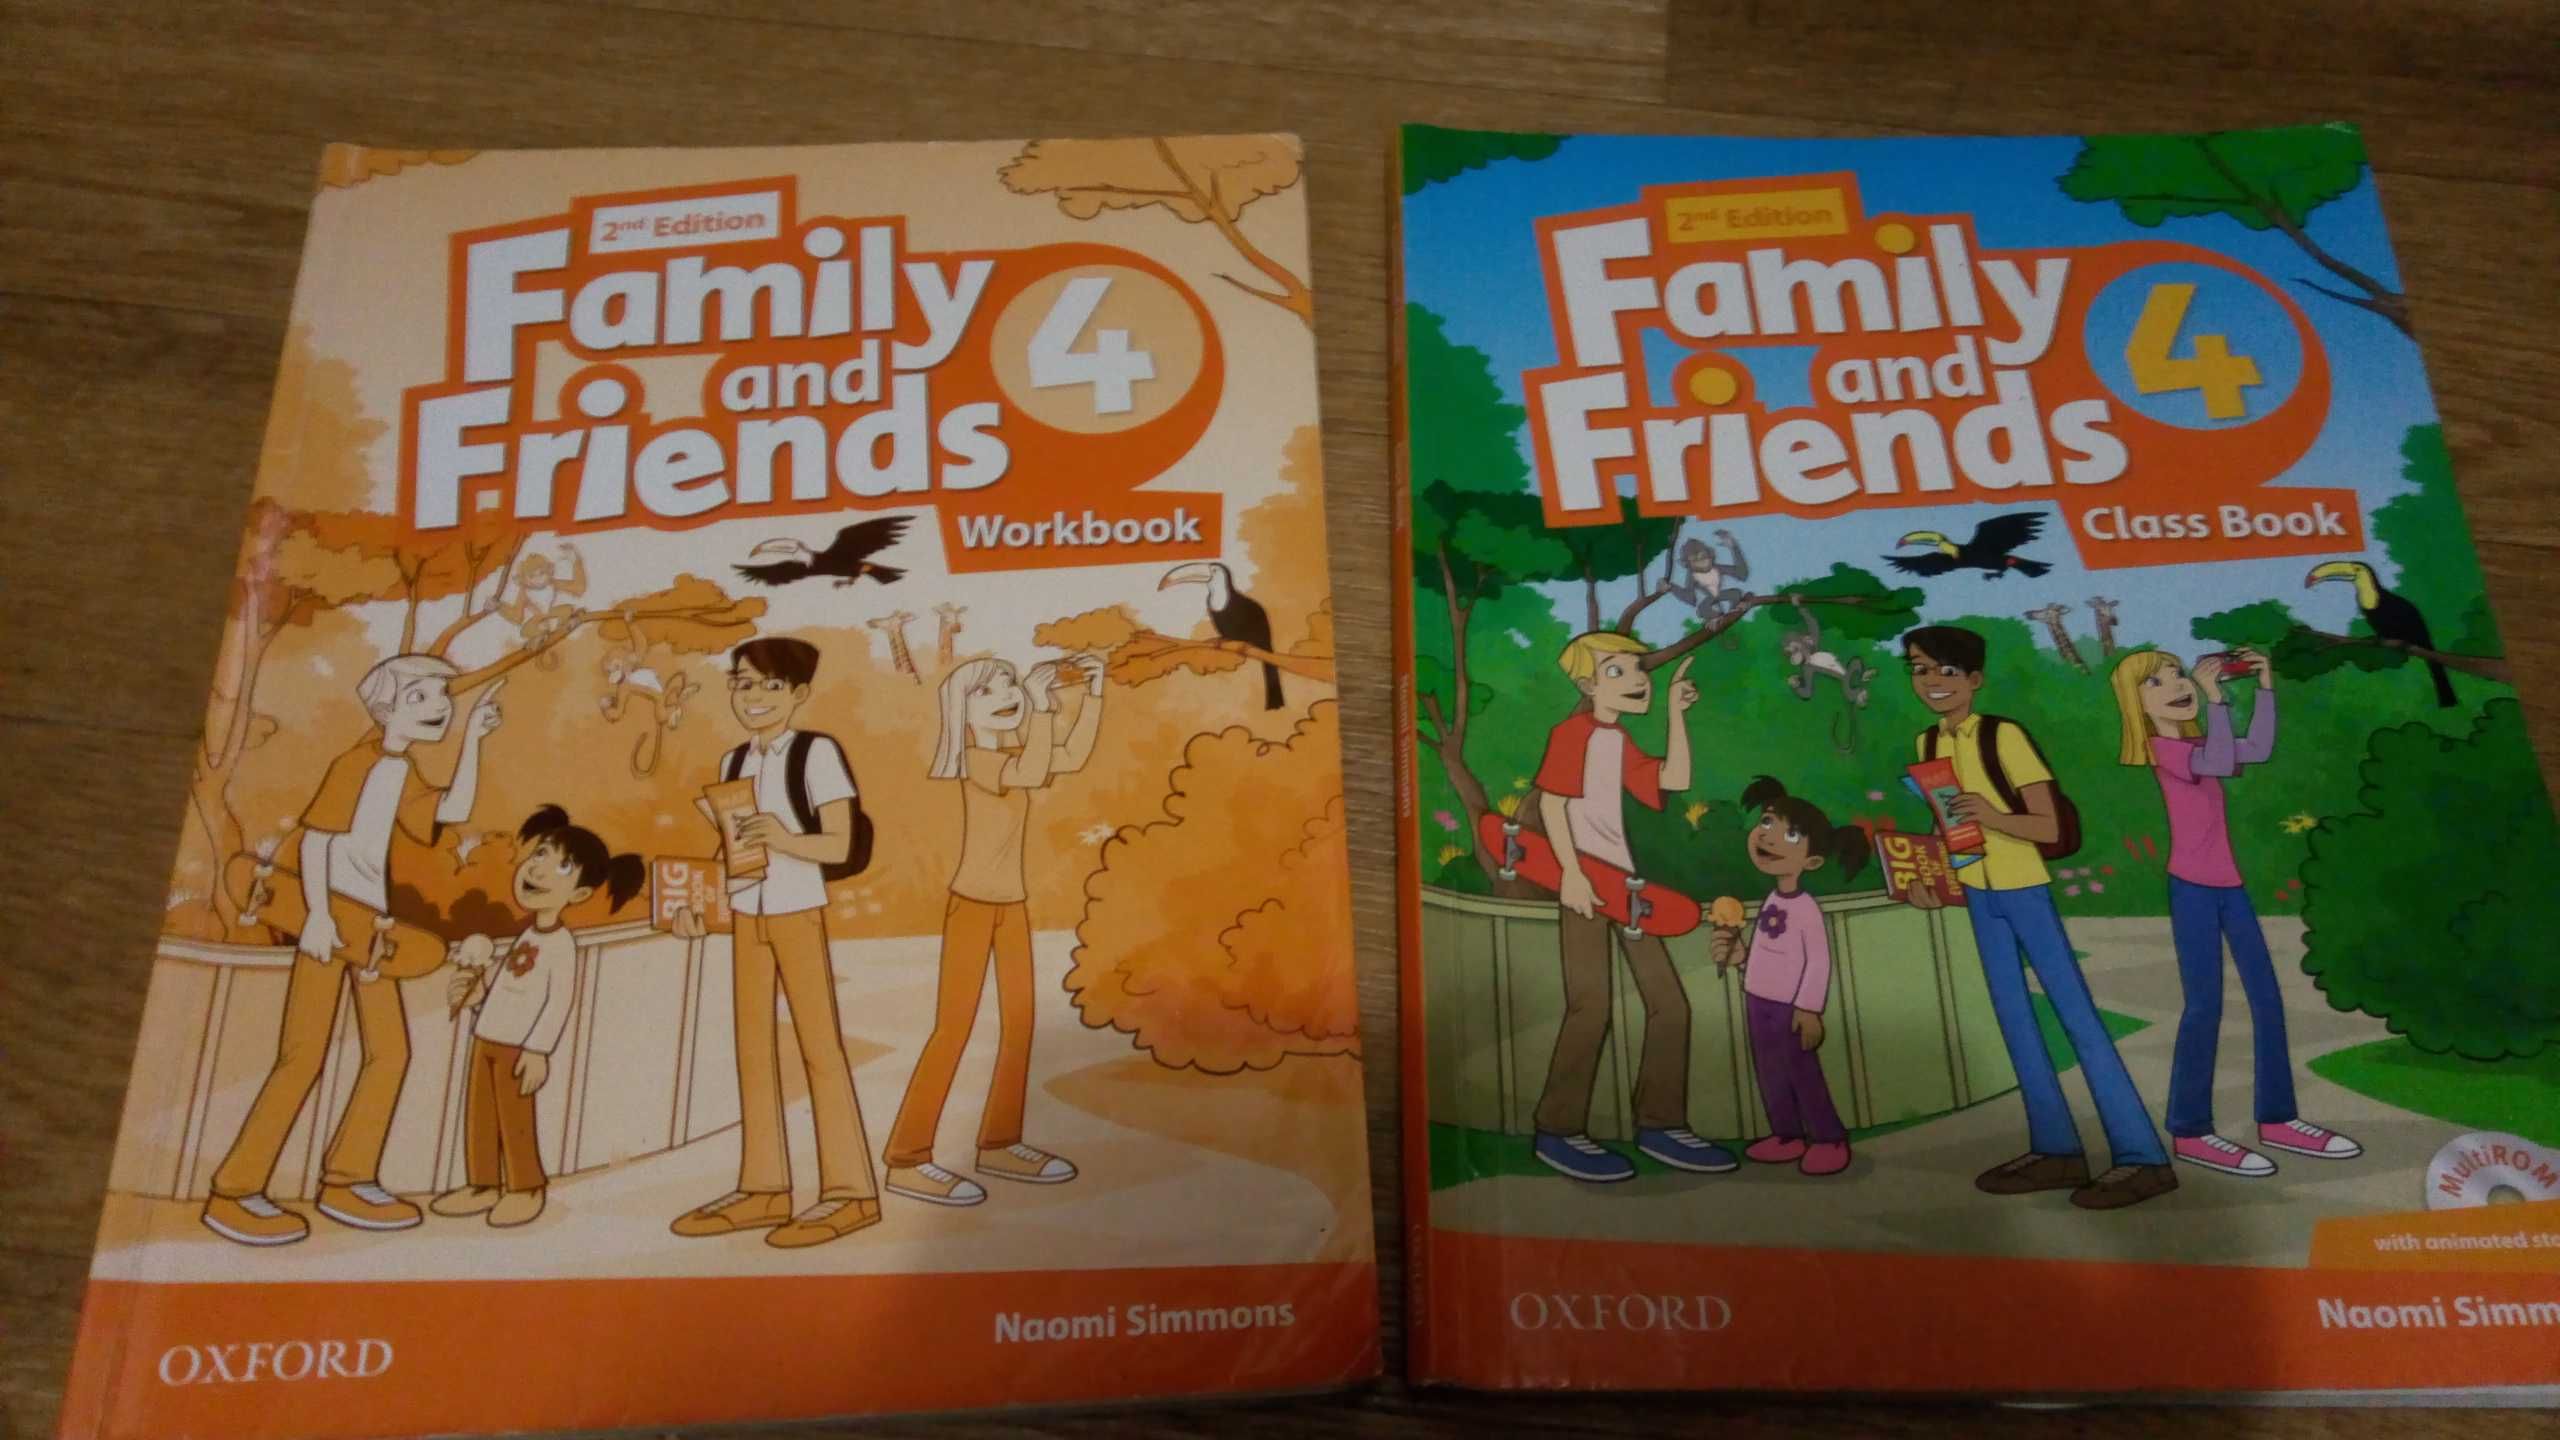 Книга family and friends 1,3,4 Super minds 2 Academy stars 4,5